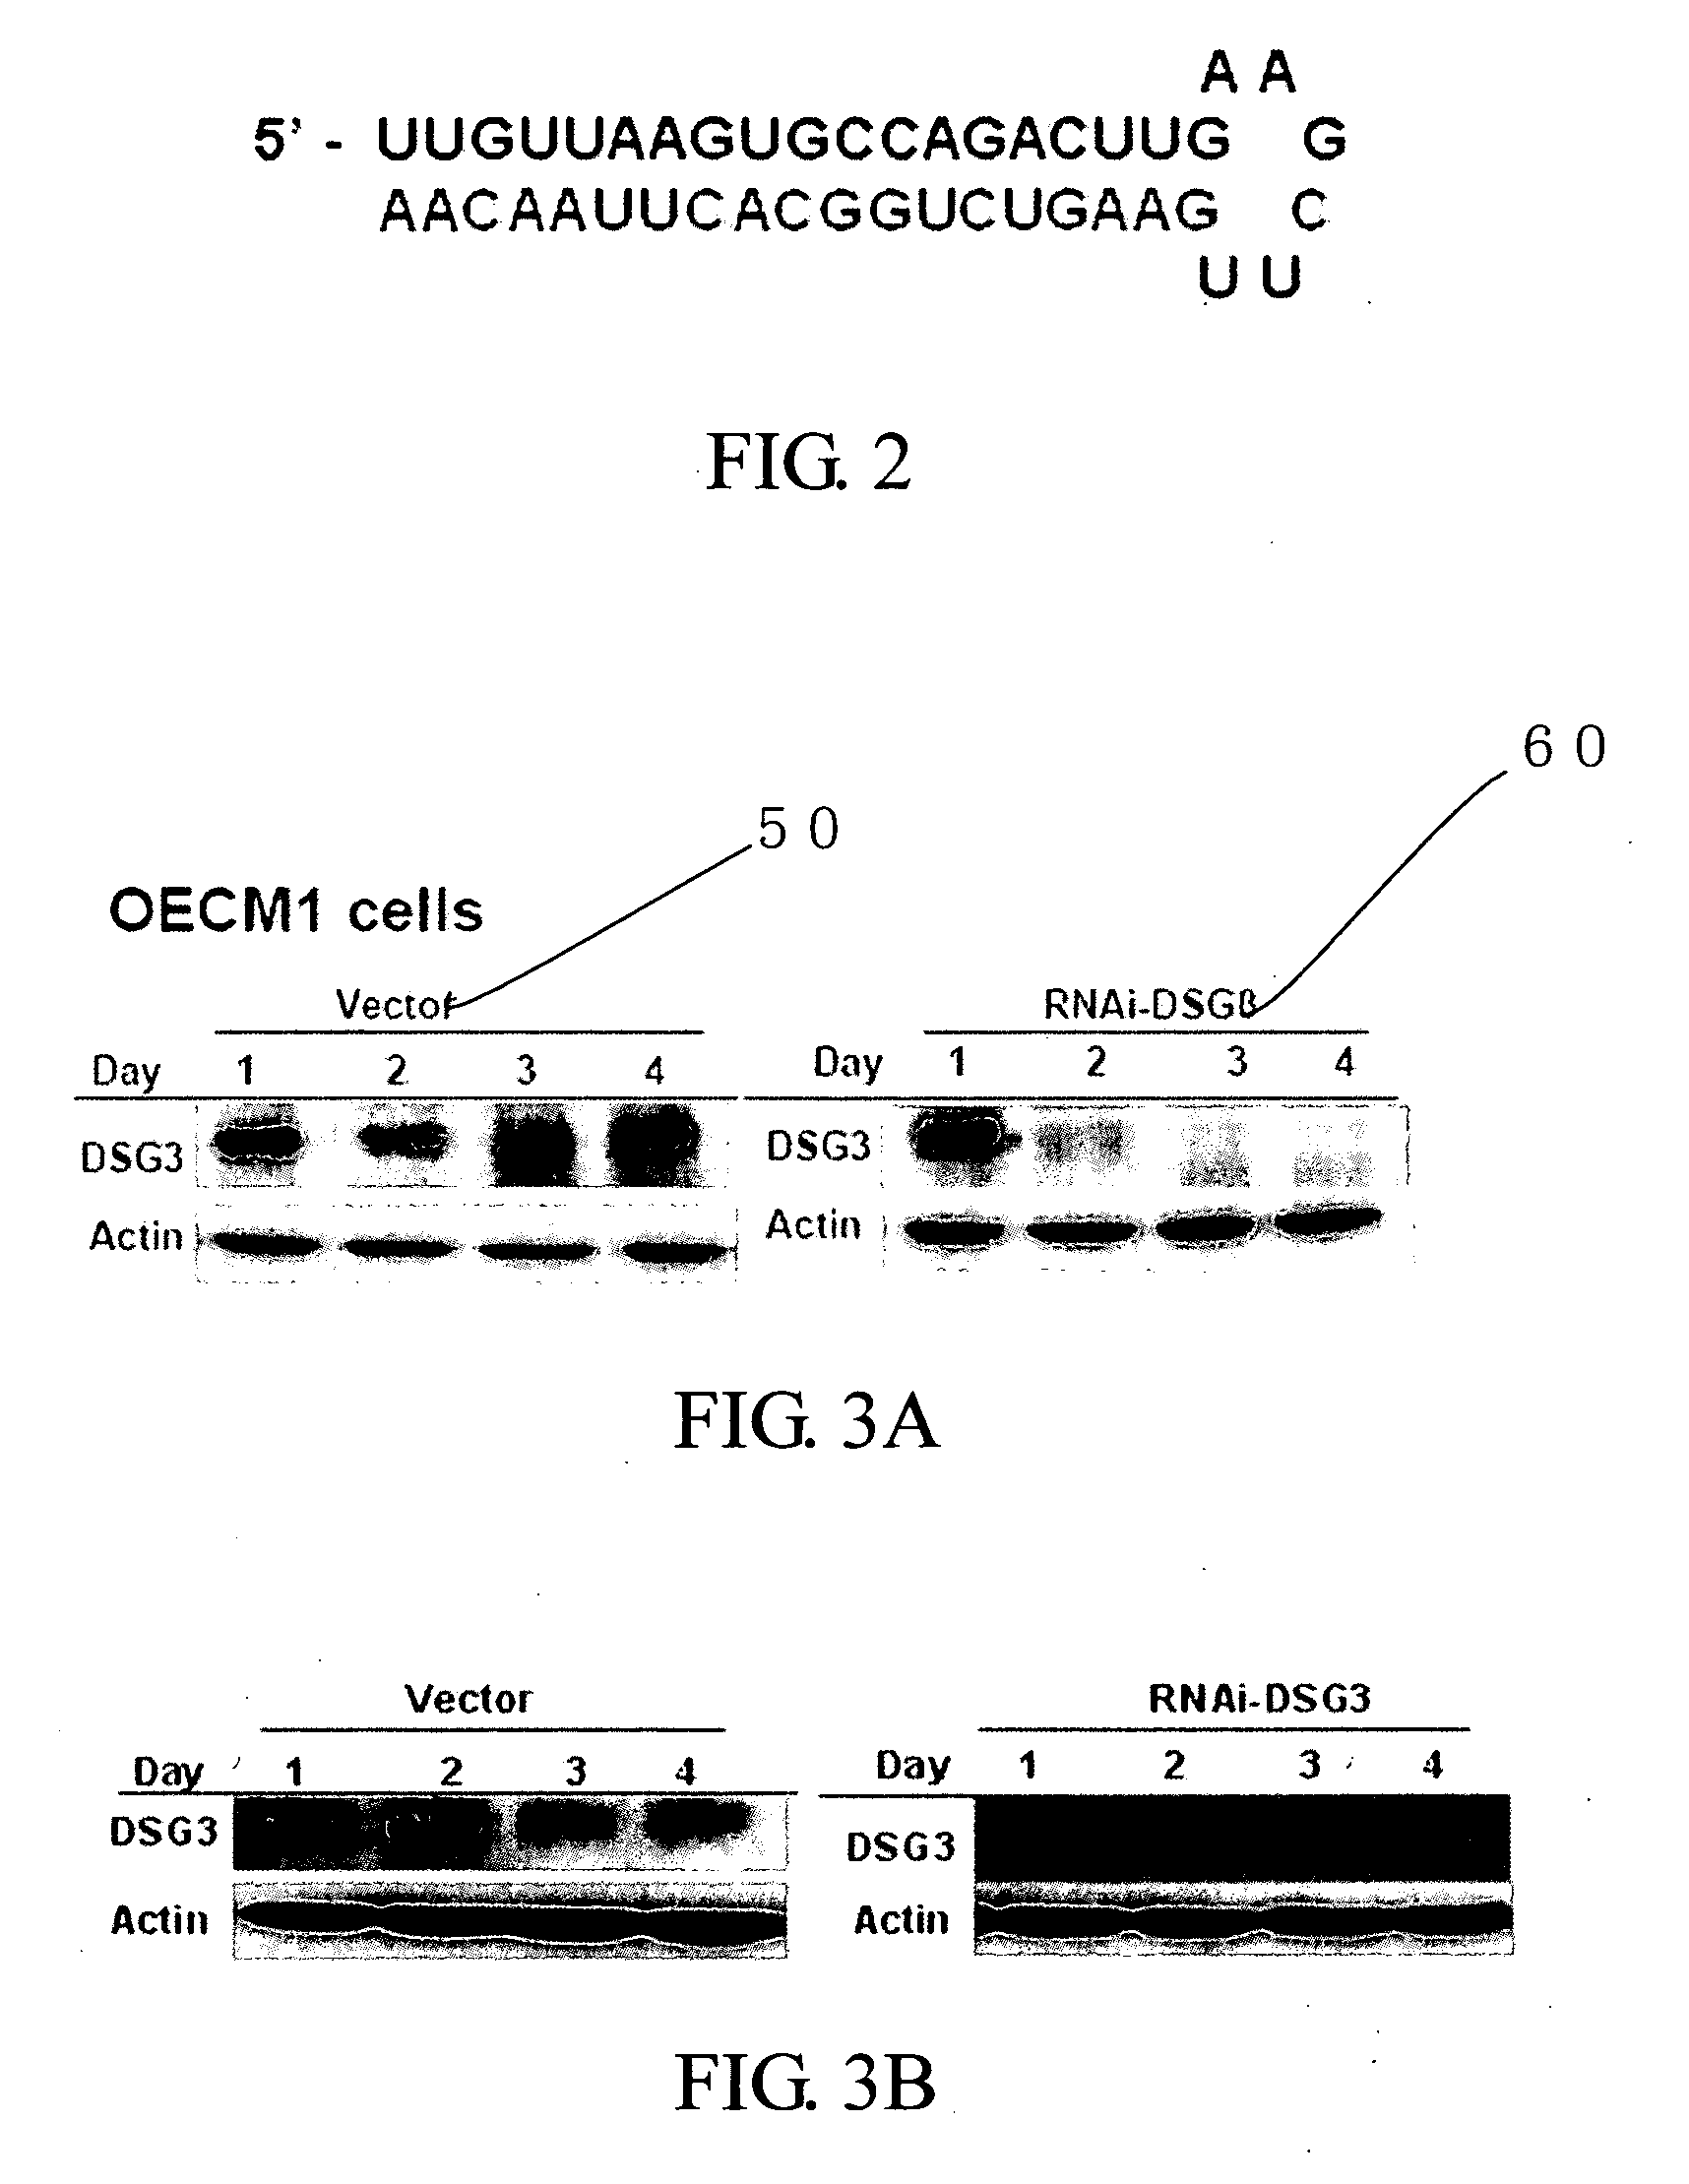 Method on clinical applications in head neck cancer by using DSG3 molecule for predicting malignant degree of cancer, serving as a molecular target and using RNA jamming sequence on inhibition-specific of DSG3 expression